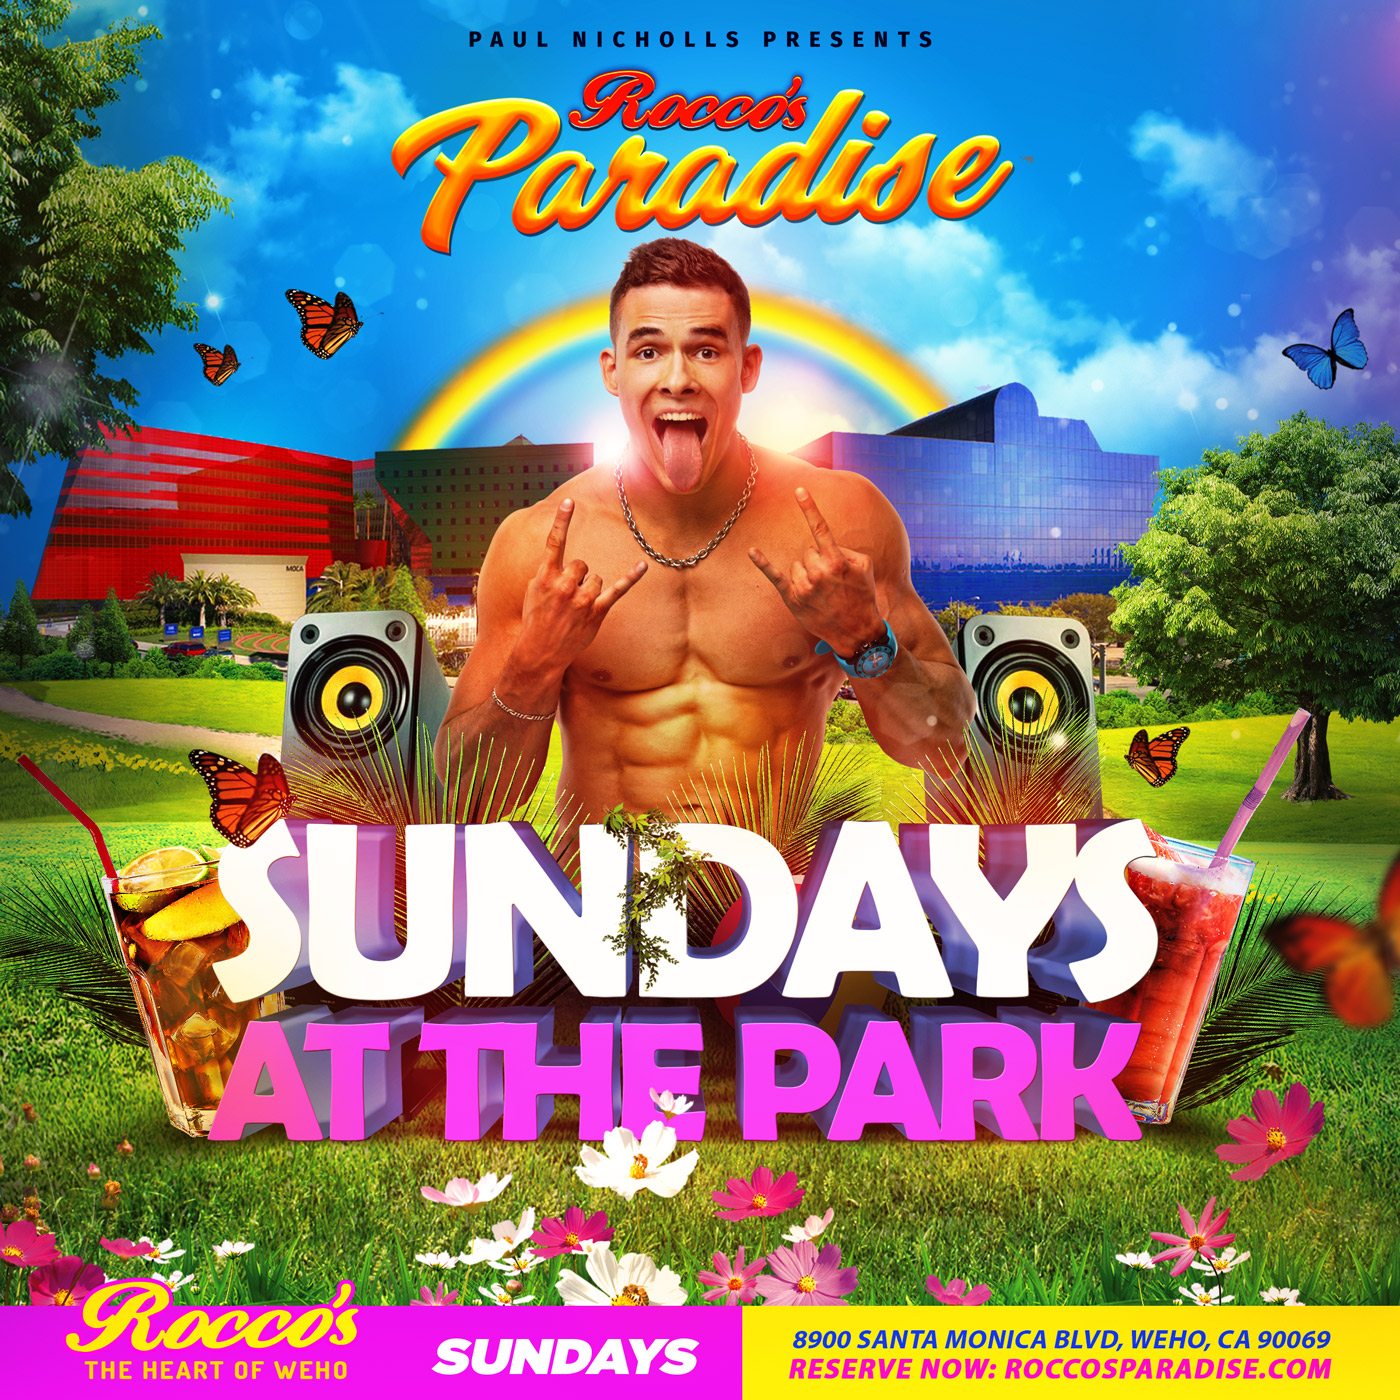 Buy Tickets to Sundays at the Park in West Hollywood on Apr 25, 2021